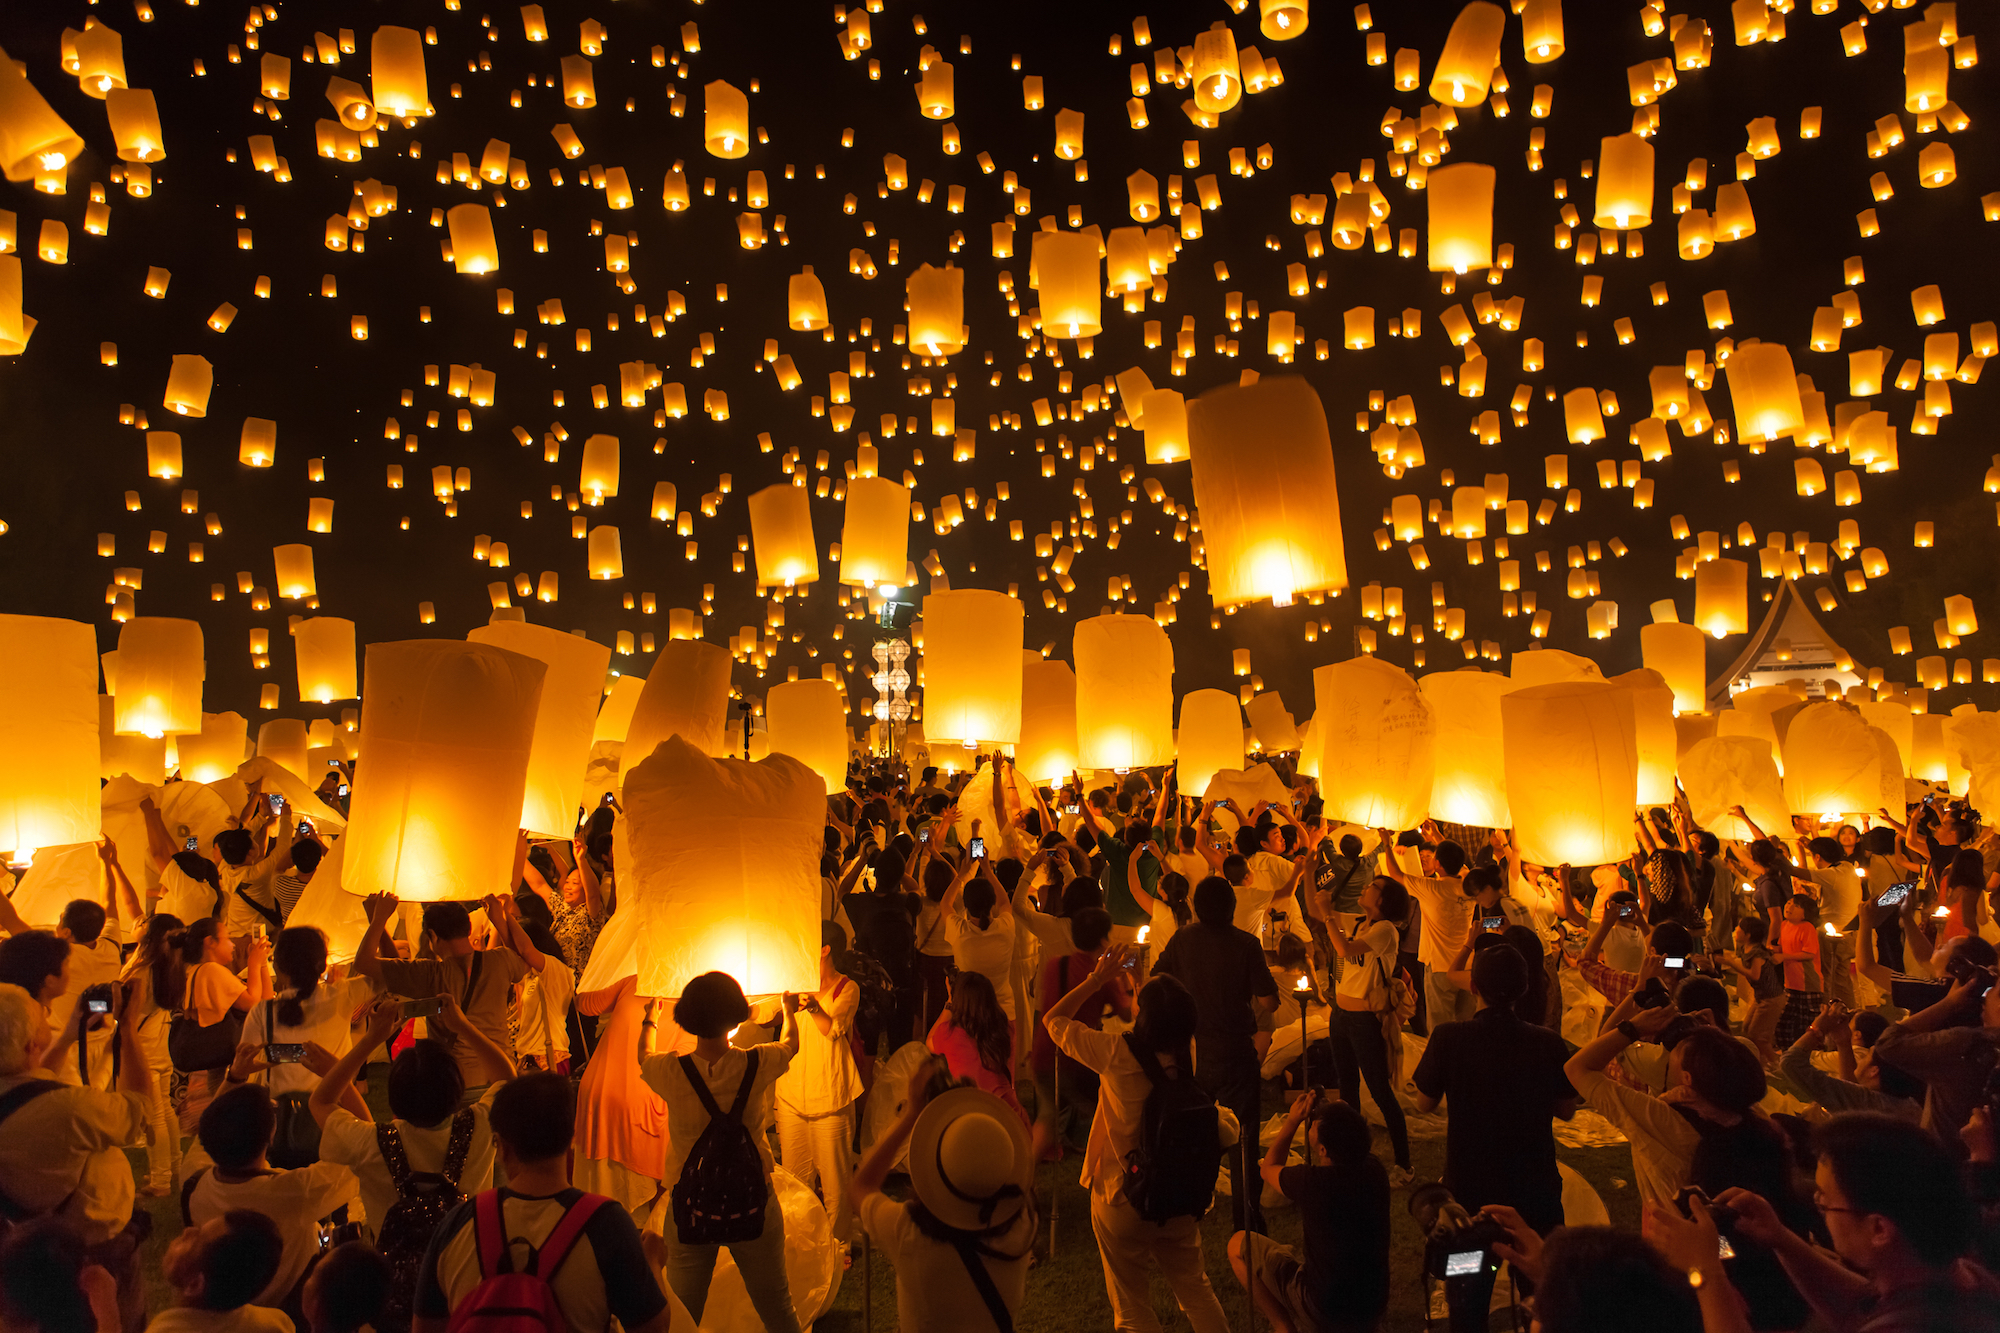 In Buddhist culture, releasing a floating lantern into the sky represents optimism and new beginnings.